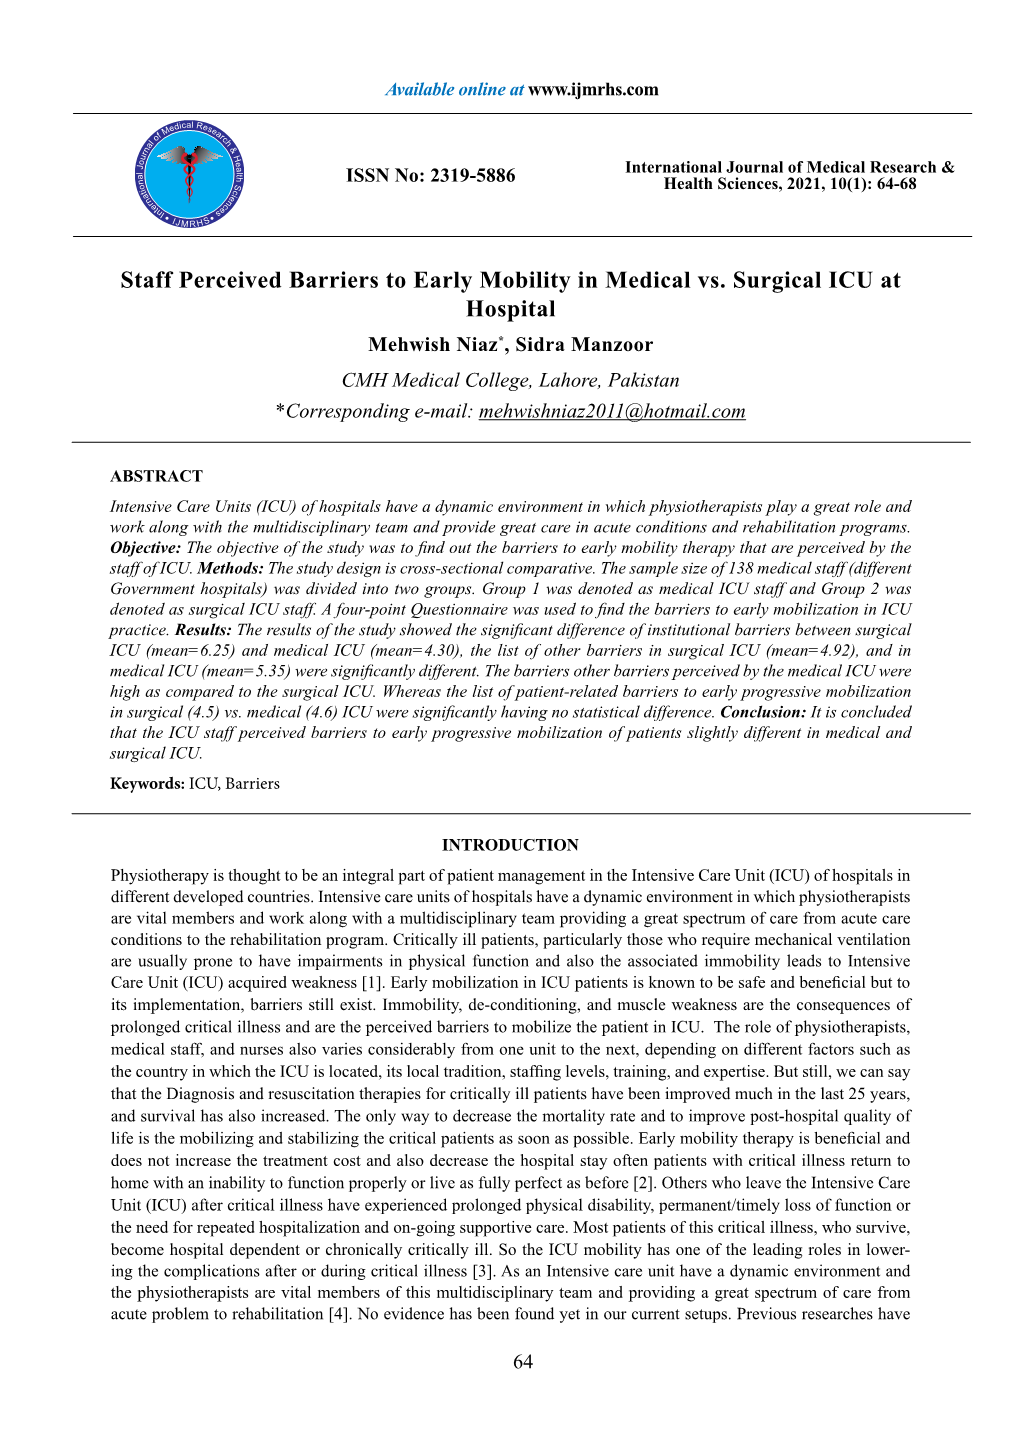 Staff Perceived Barriers to Early Mobility in Medical Vs. Surgical ICU